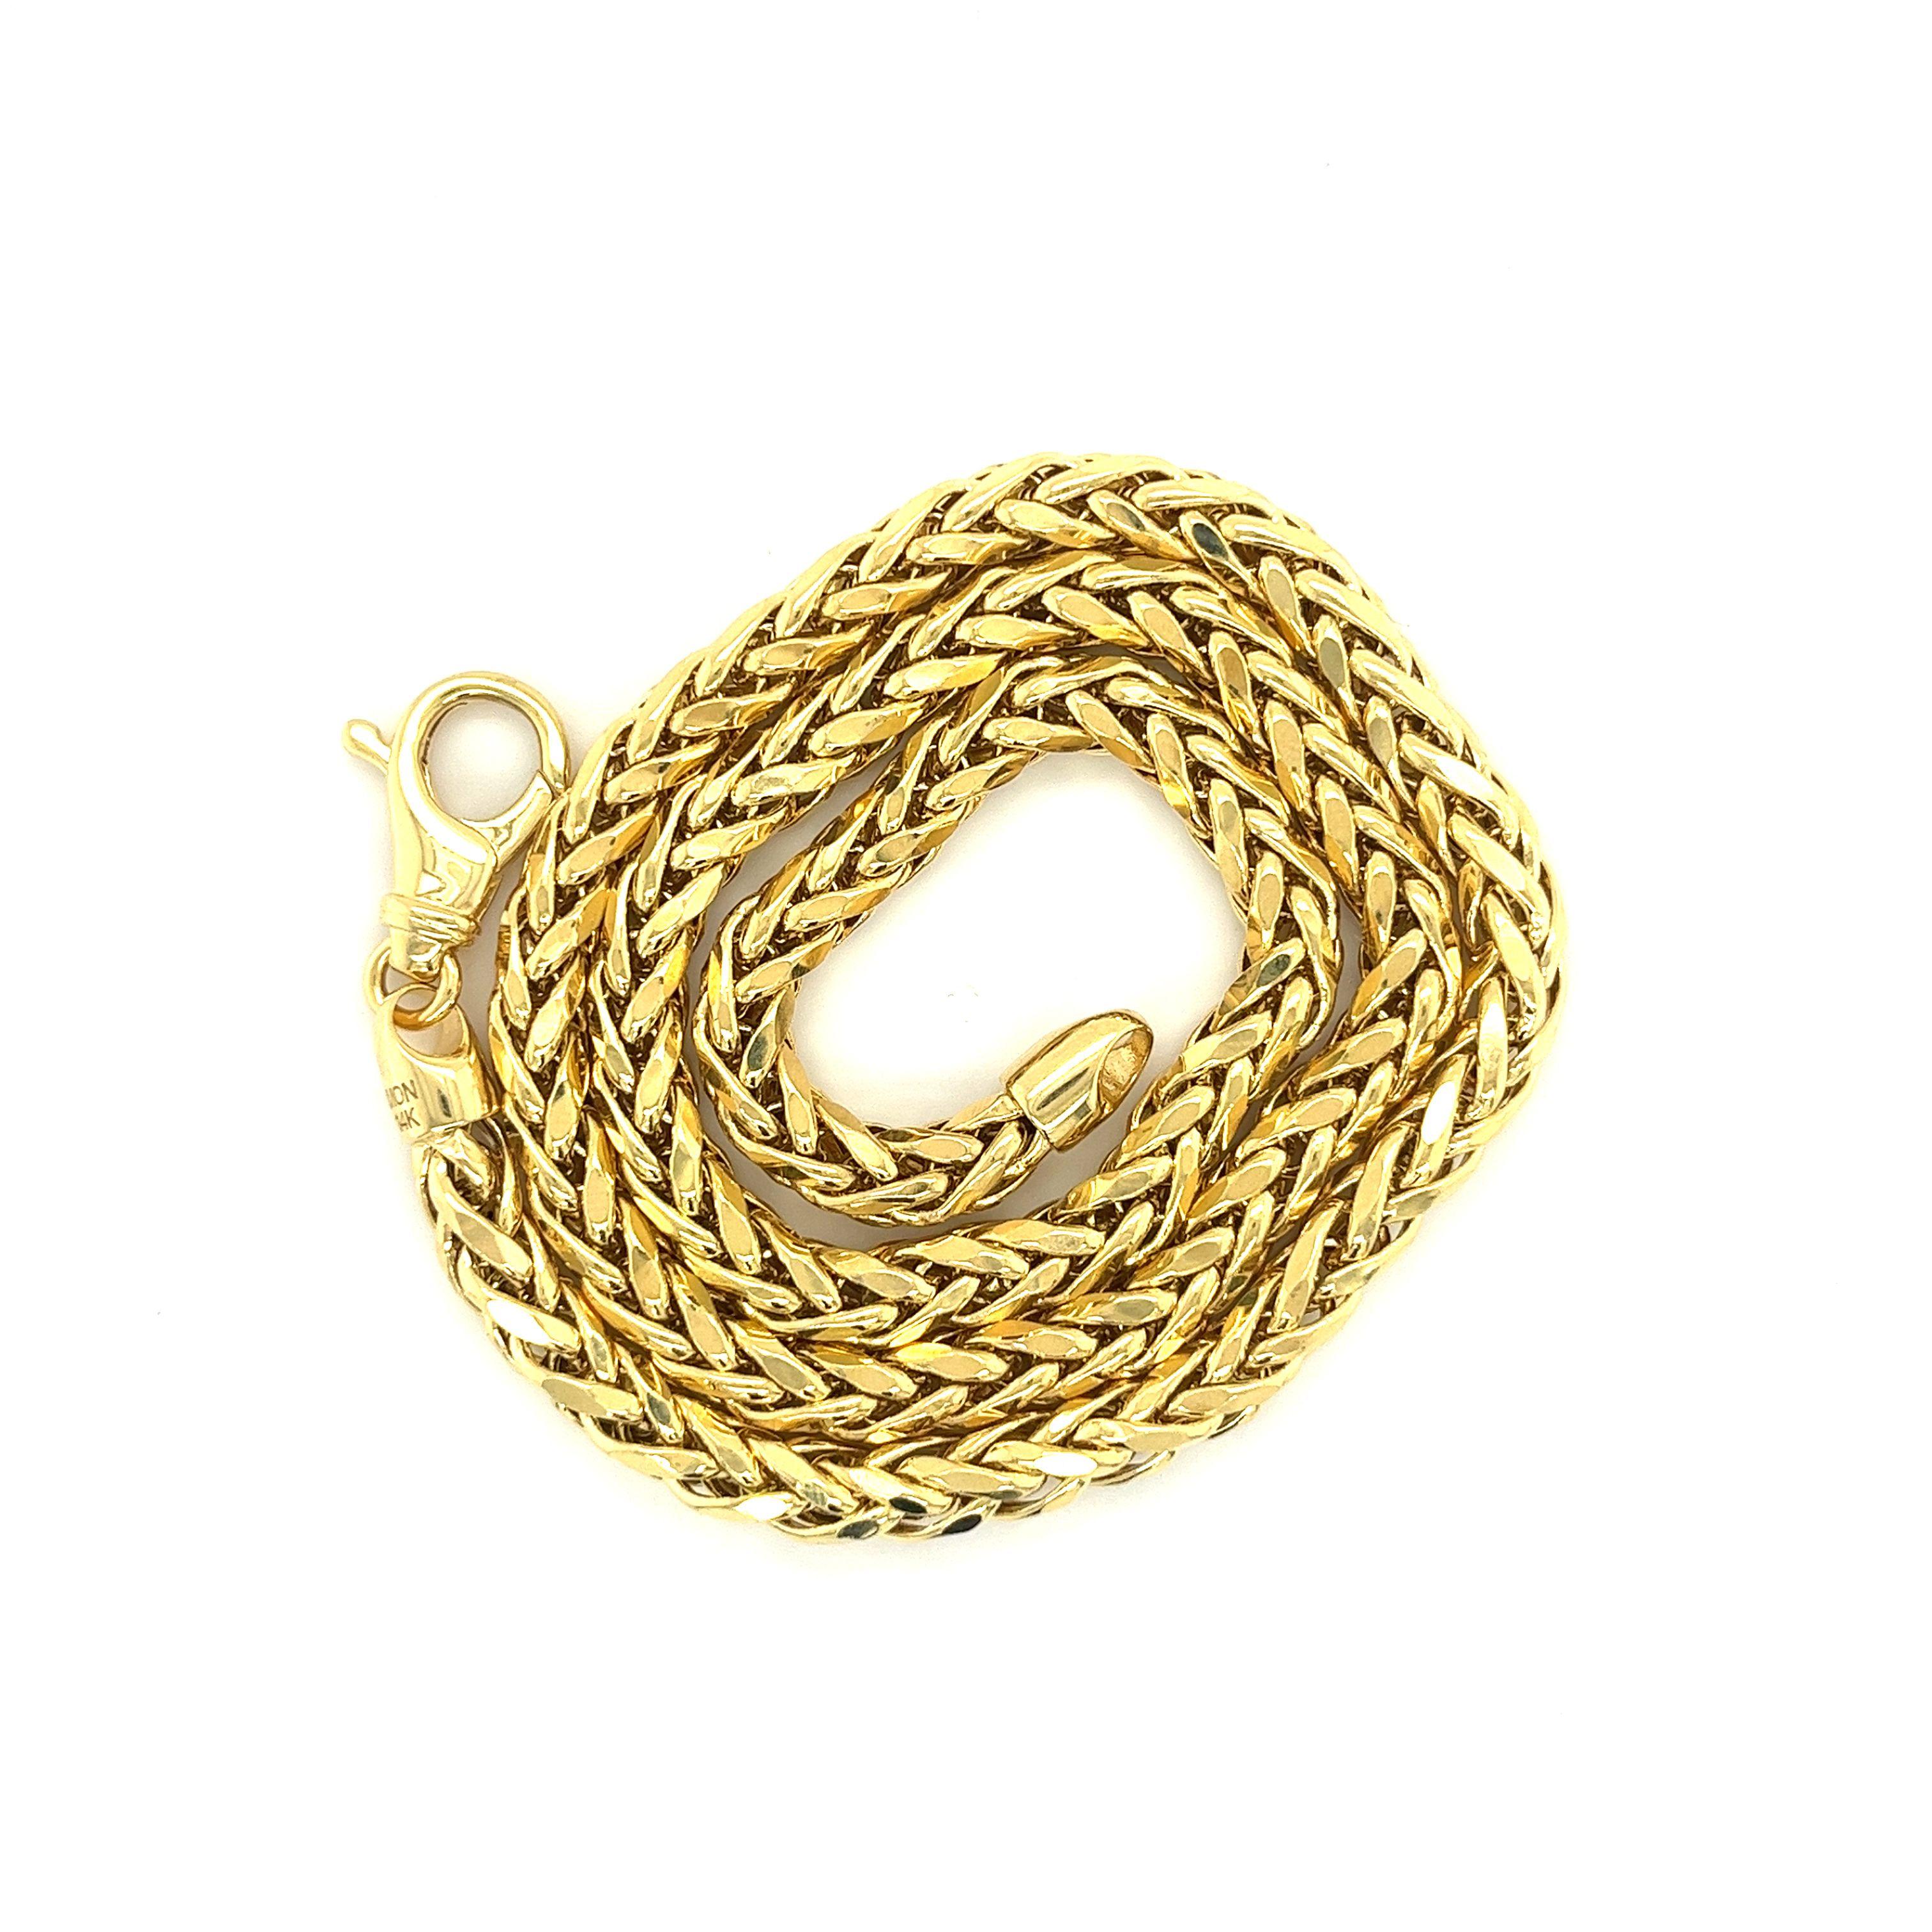 14K Gold Franco-Spiga link chain necklace with lobster claw closure. Also known as a wheat chain. 

This gold necklace is REAL 14 KARAT GOLD. Brand new, hypoallergenic, 100% waterproof, genuine 14k Yellow Gold. NOT Plated, NOT Filled, and NOT